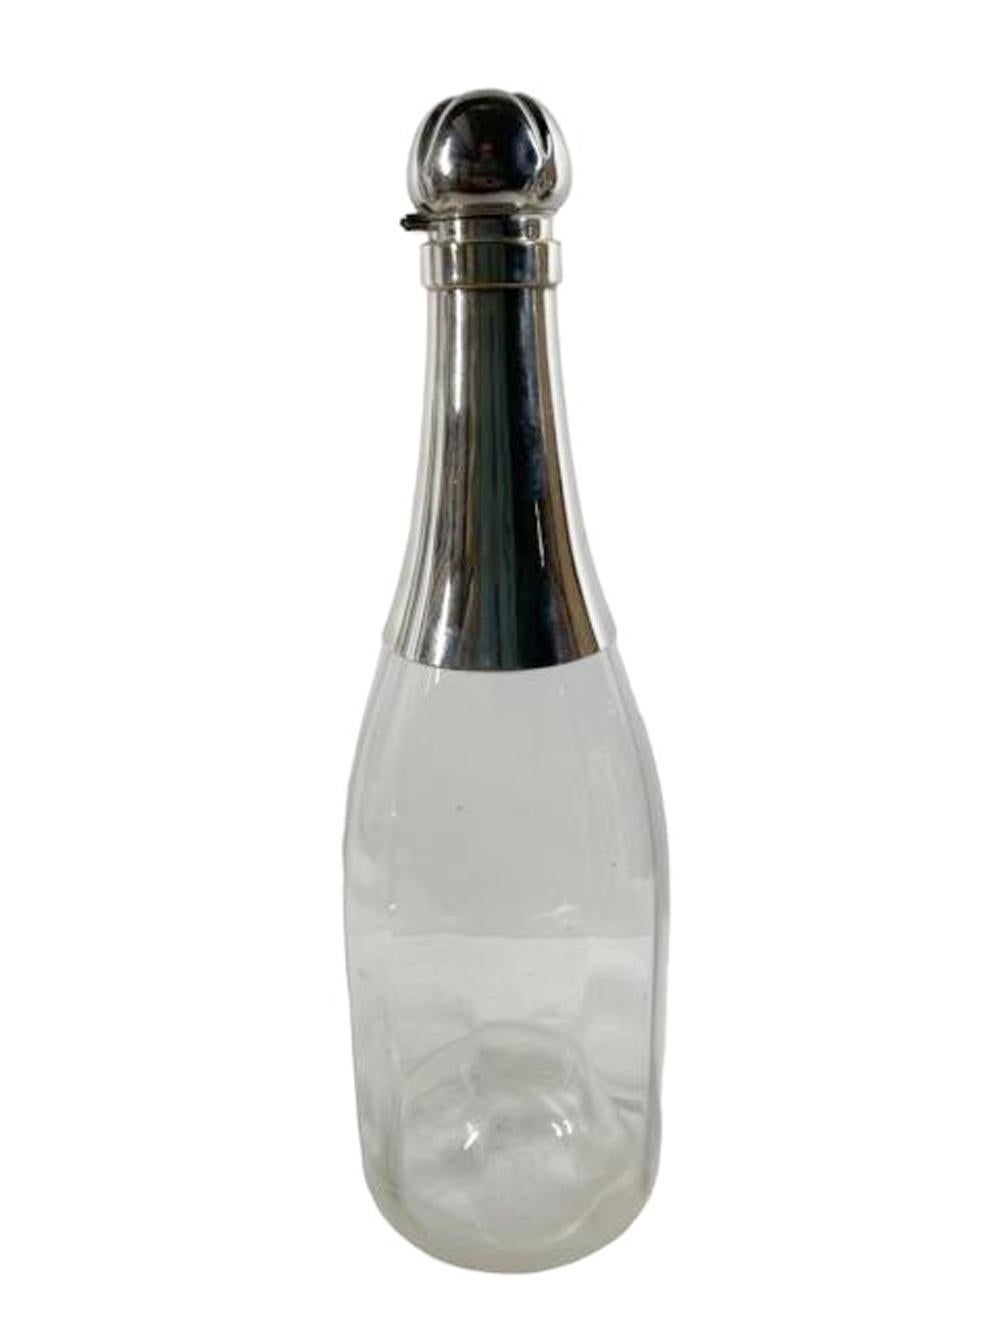 Large Art Deco decanter in the shape of a champagne bottle of optically ribbed clear glass mounted with a silver plate neck and hinged stopper in the form of a champagne cork.